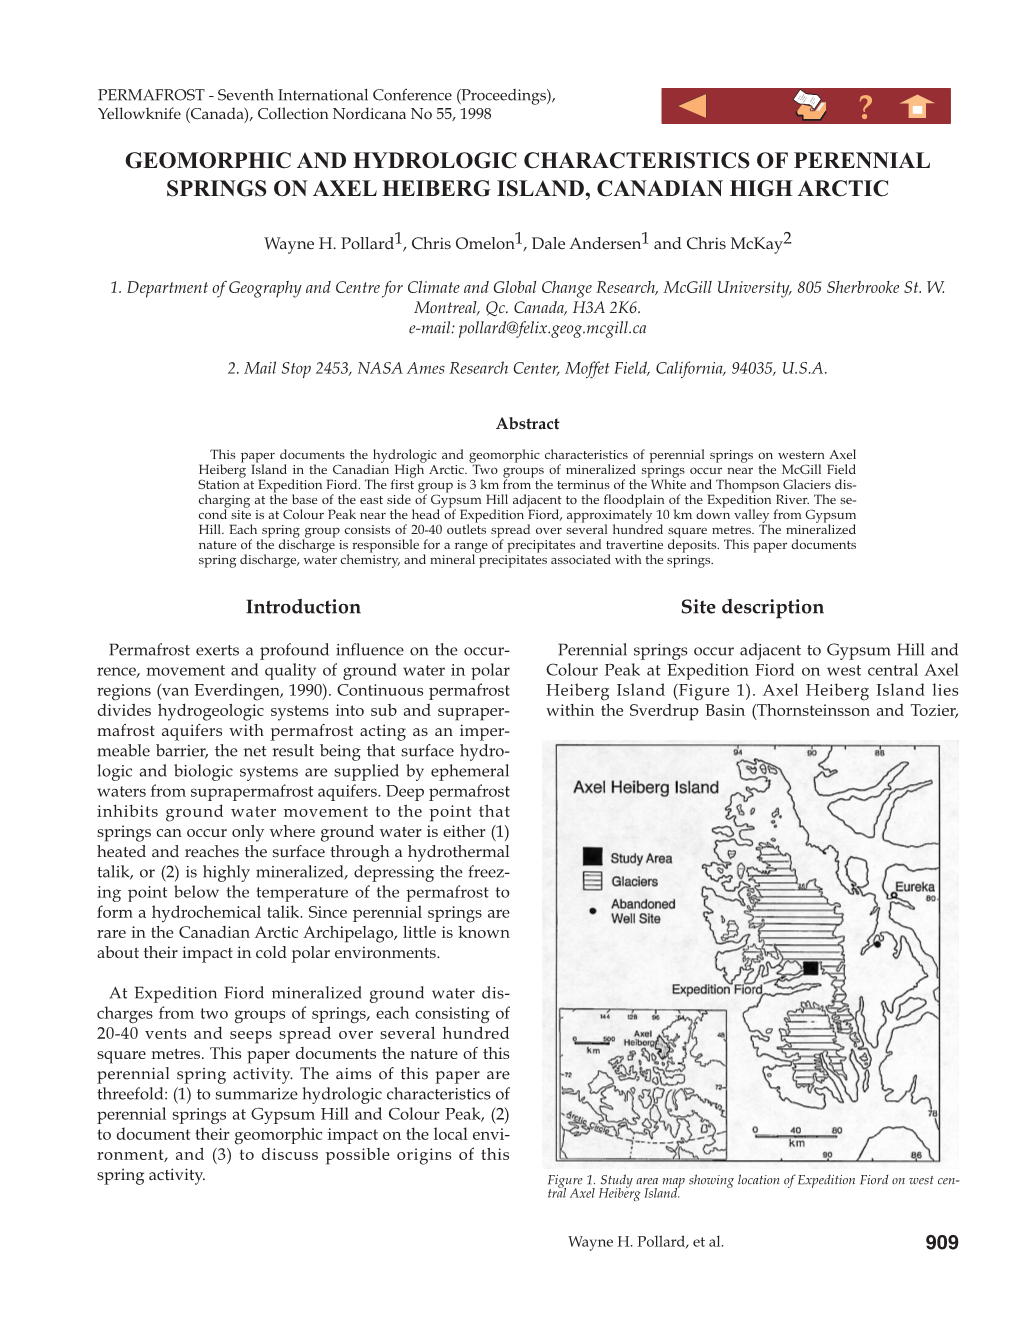 Geomorphic and Hydrologic Characteristics of Perennial Springs on Axel Heiberg Island, Canadian High Arctic